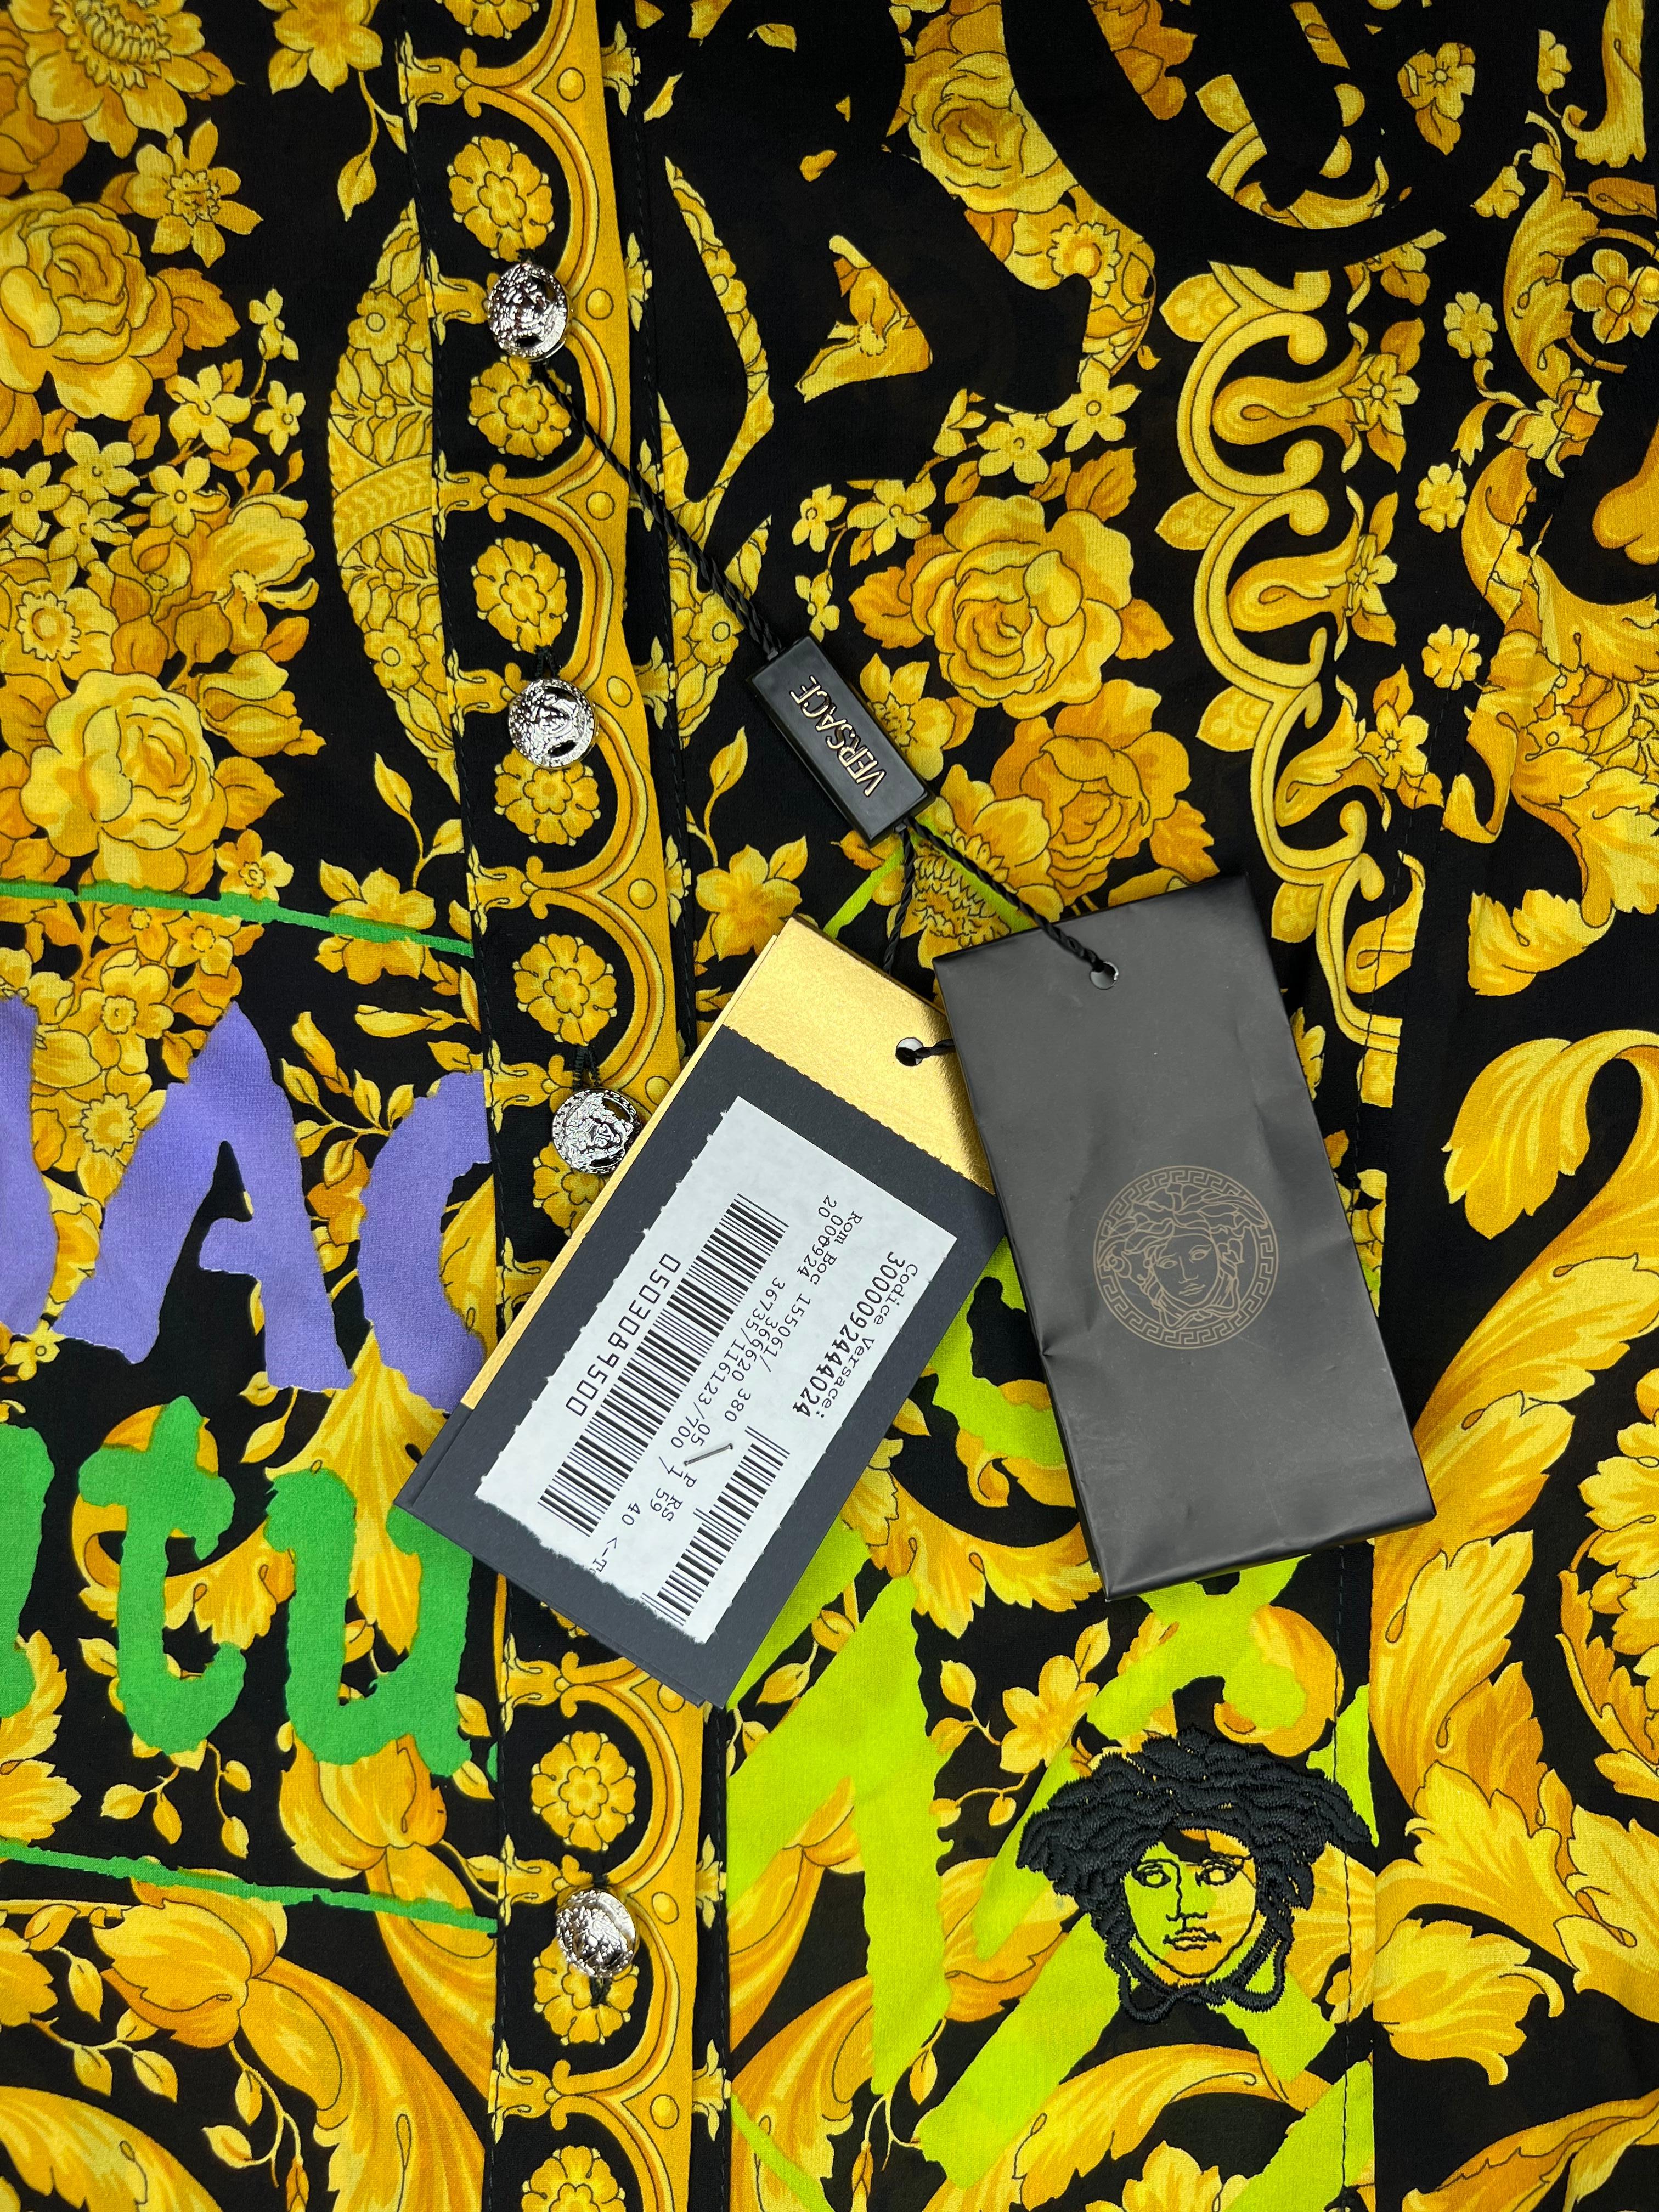 NWT S/S 2005 Versace by Donatella Chaos Couture Gold Baroque Graffiti Print Top For Sale 1